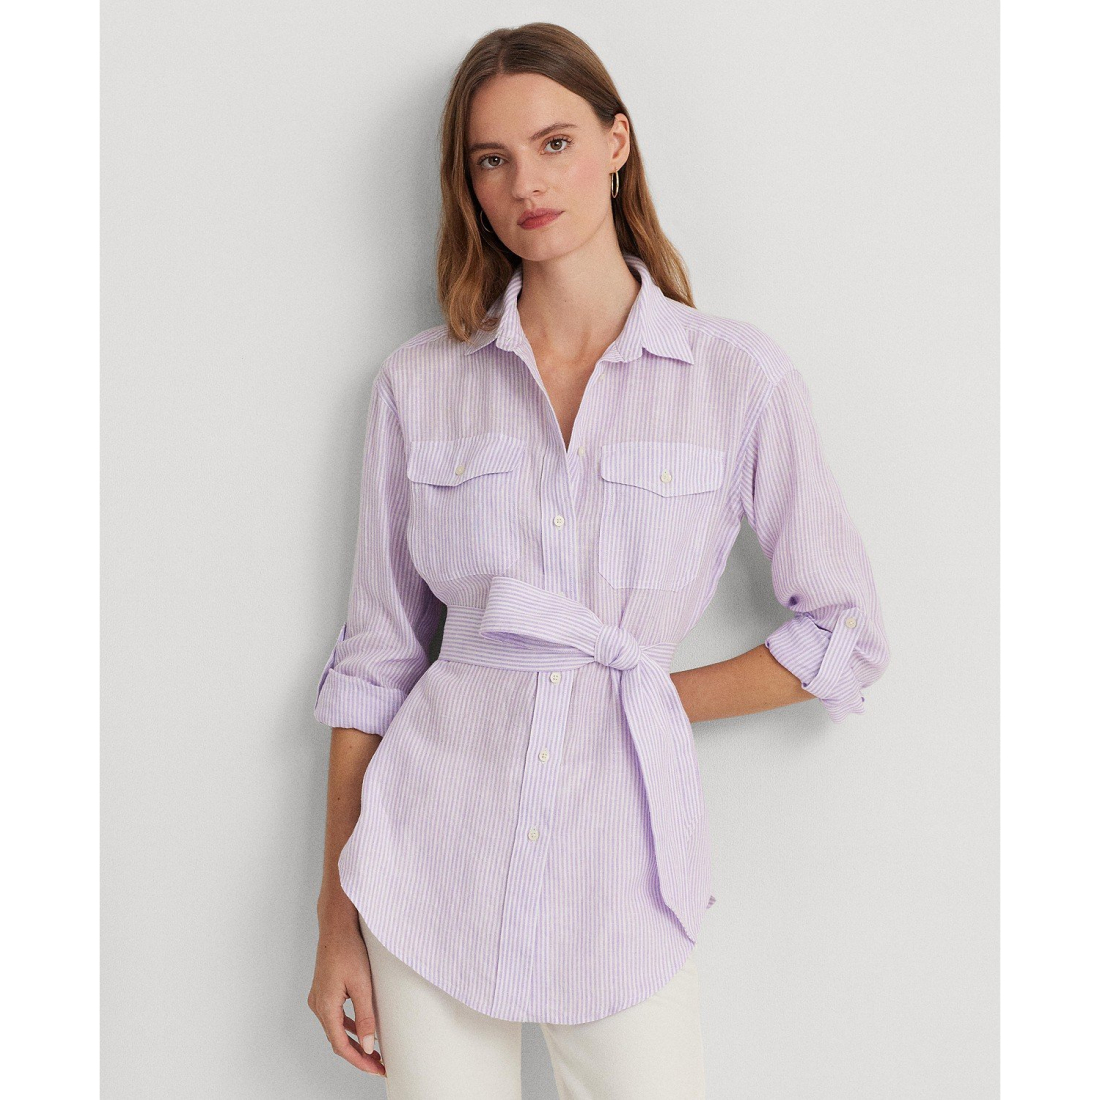 Women's 'Striped Belted Utility' Shirt